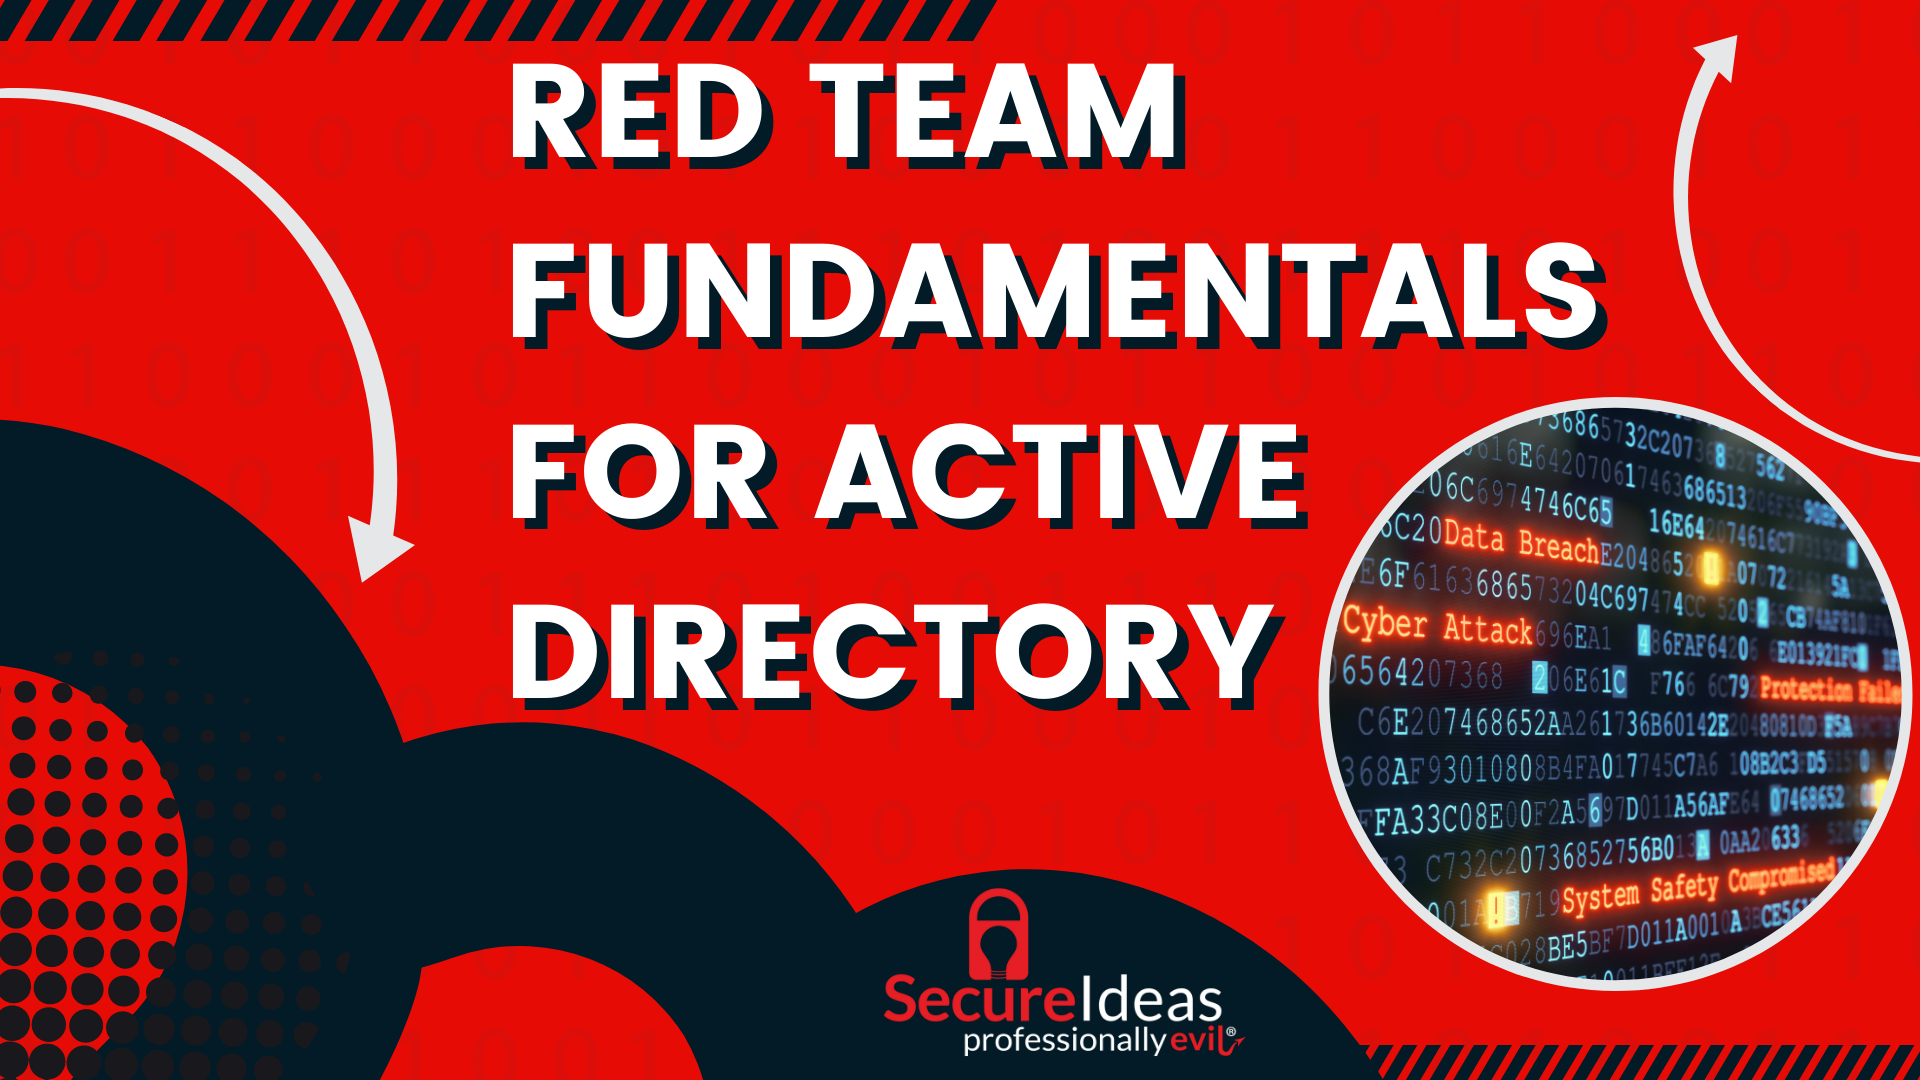 Red Team Fundamentals for Active Directory